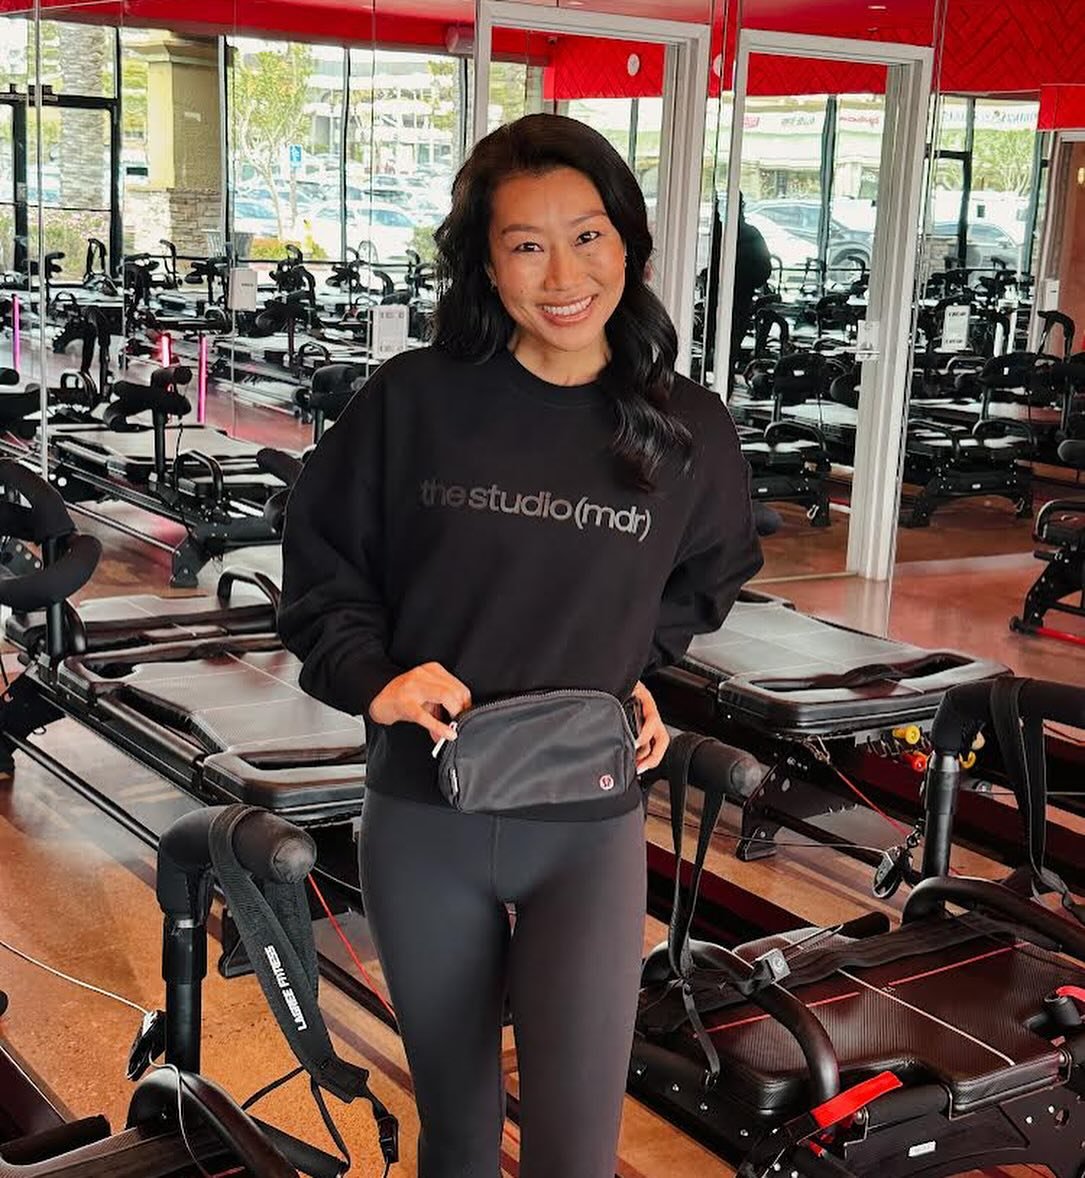 We have the CUTEST new (MDR) Merch now available! Introducing our (MDR) branded @lululemon Belt Bag! Yes, the viral belt bag 😱 We also have this chic black (MDR) sweatshirt that is perfect for spring! Available for purchase NOW in studio! 🛍️